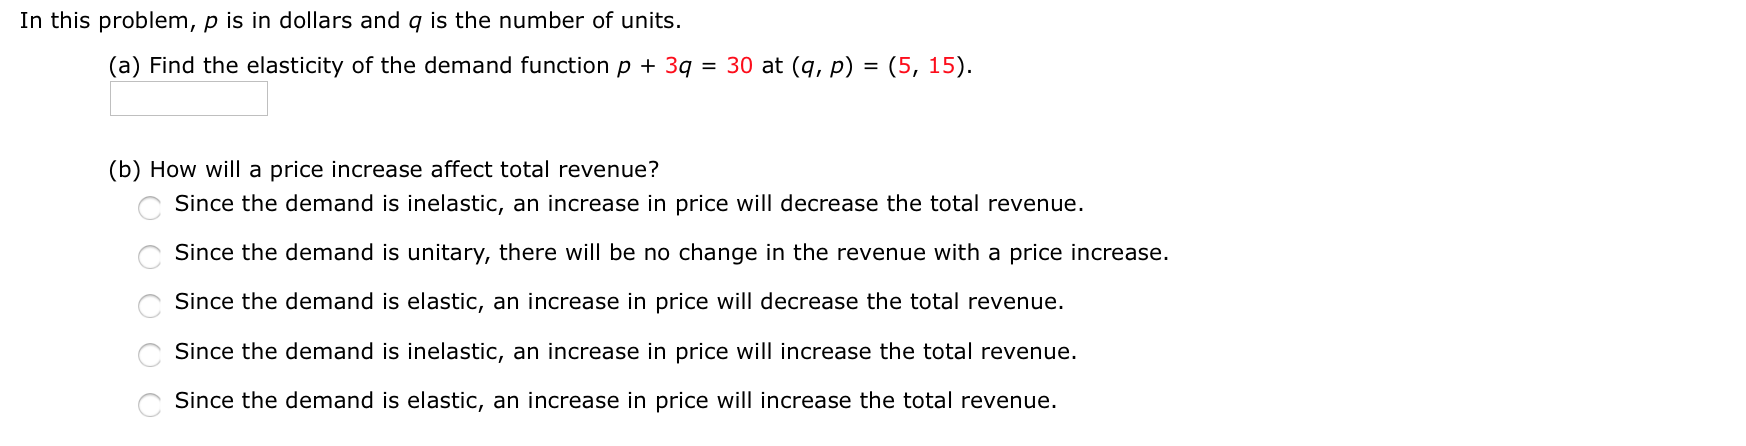 In this problem, p is in dollars and q is the number of units.
(a) Find the elasticity of the demand function p + 3q
= 30 at (q, p) = (5, 15).
(b) How will a price increase affect total revenue?
Since the demand is inelastic, an increase in price will decrease the total revenue.
Since the demand is unitary, there will be no change in the revenue with a price increase.
Since the demand is elastic, an increase in price will decrease the total revenue.
Since the demand is inelastic, an increase in price will increase the total revenue.
Since the demand is elastic, an increase in price will increase the total revenue.
